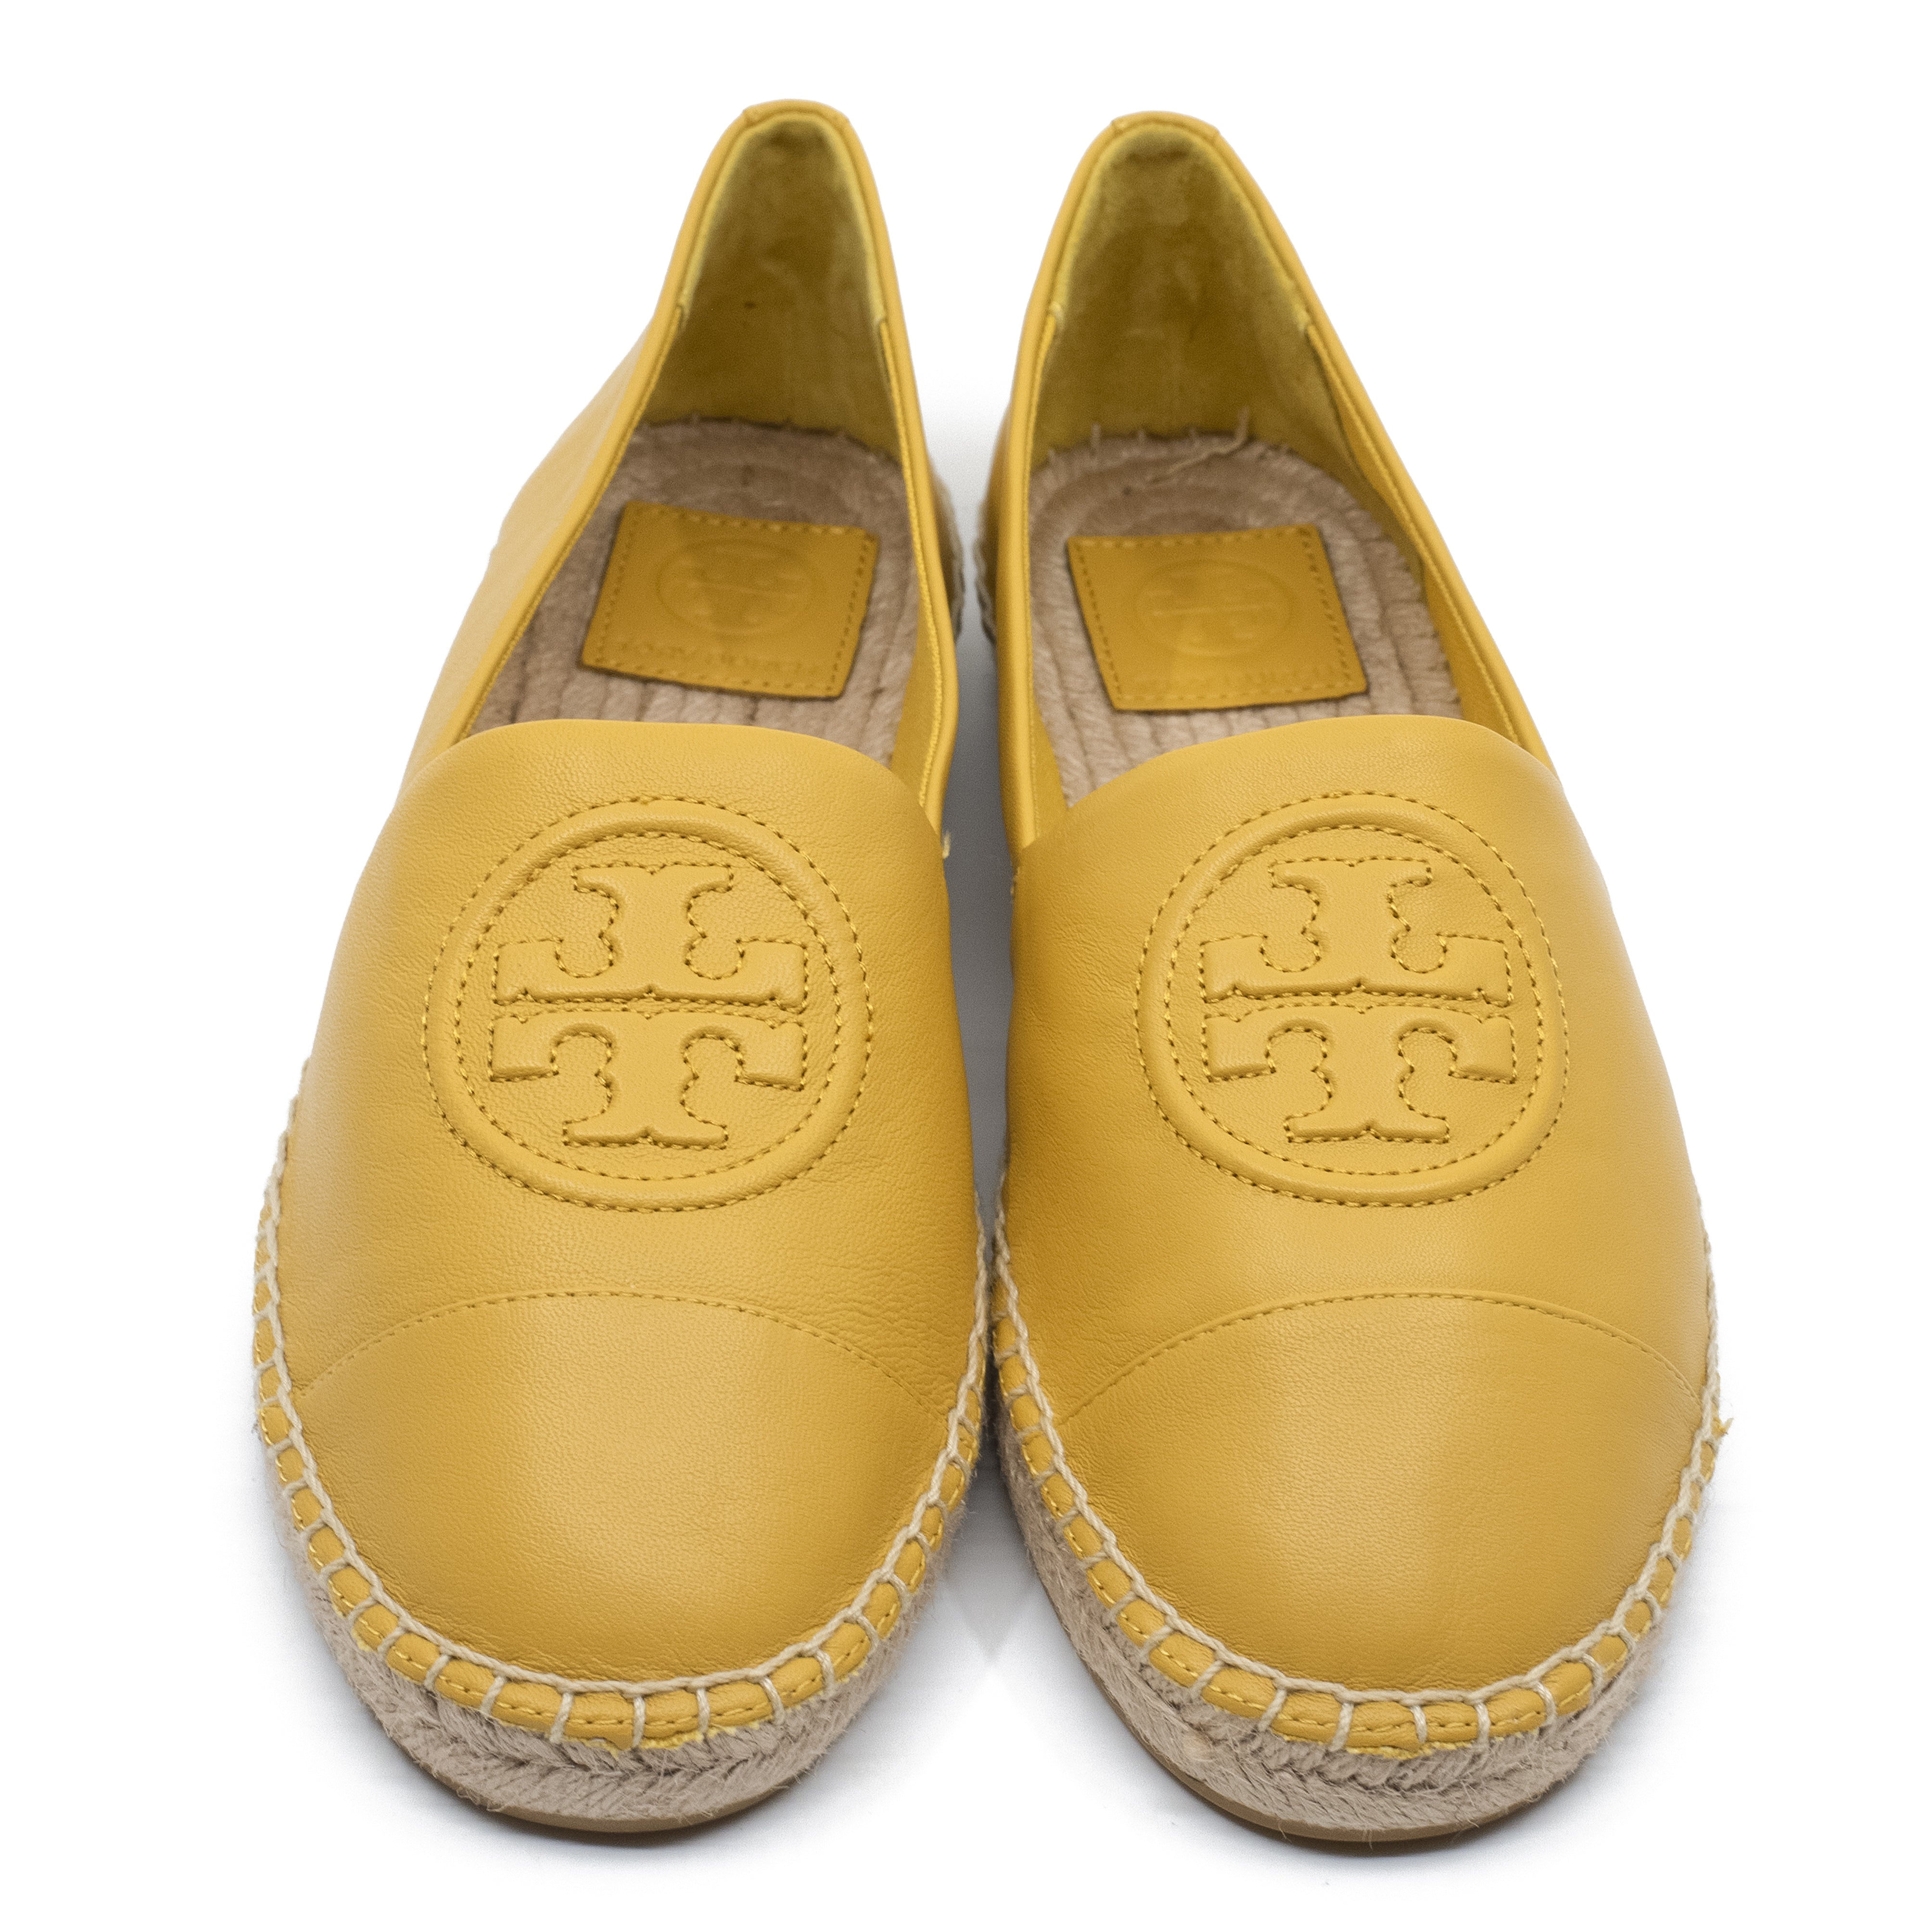 TORY BURCH BENTON COLOR BLOCK ESPADRILLE IN DAY LILY||74078-700 BY TORY  BURCH – Galleria di Lux Canada